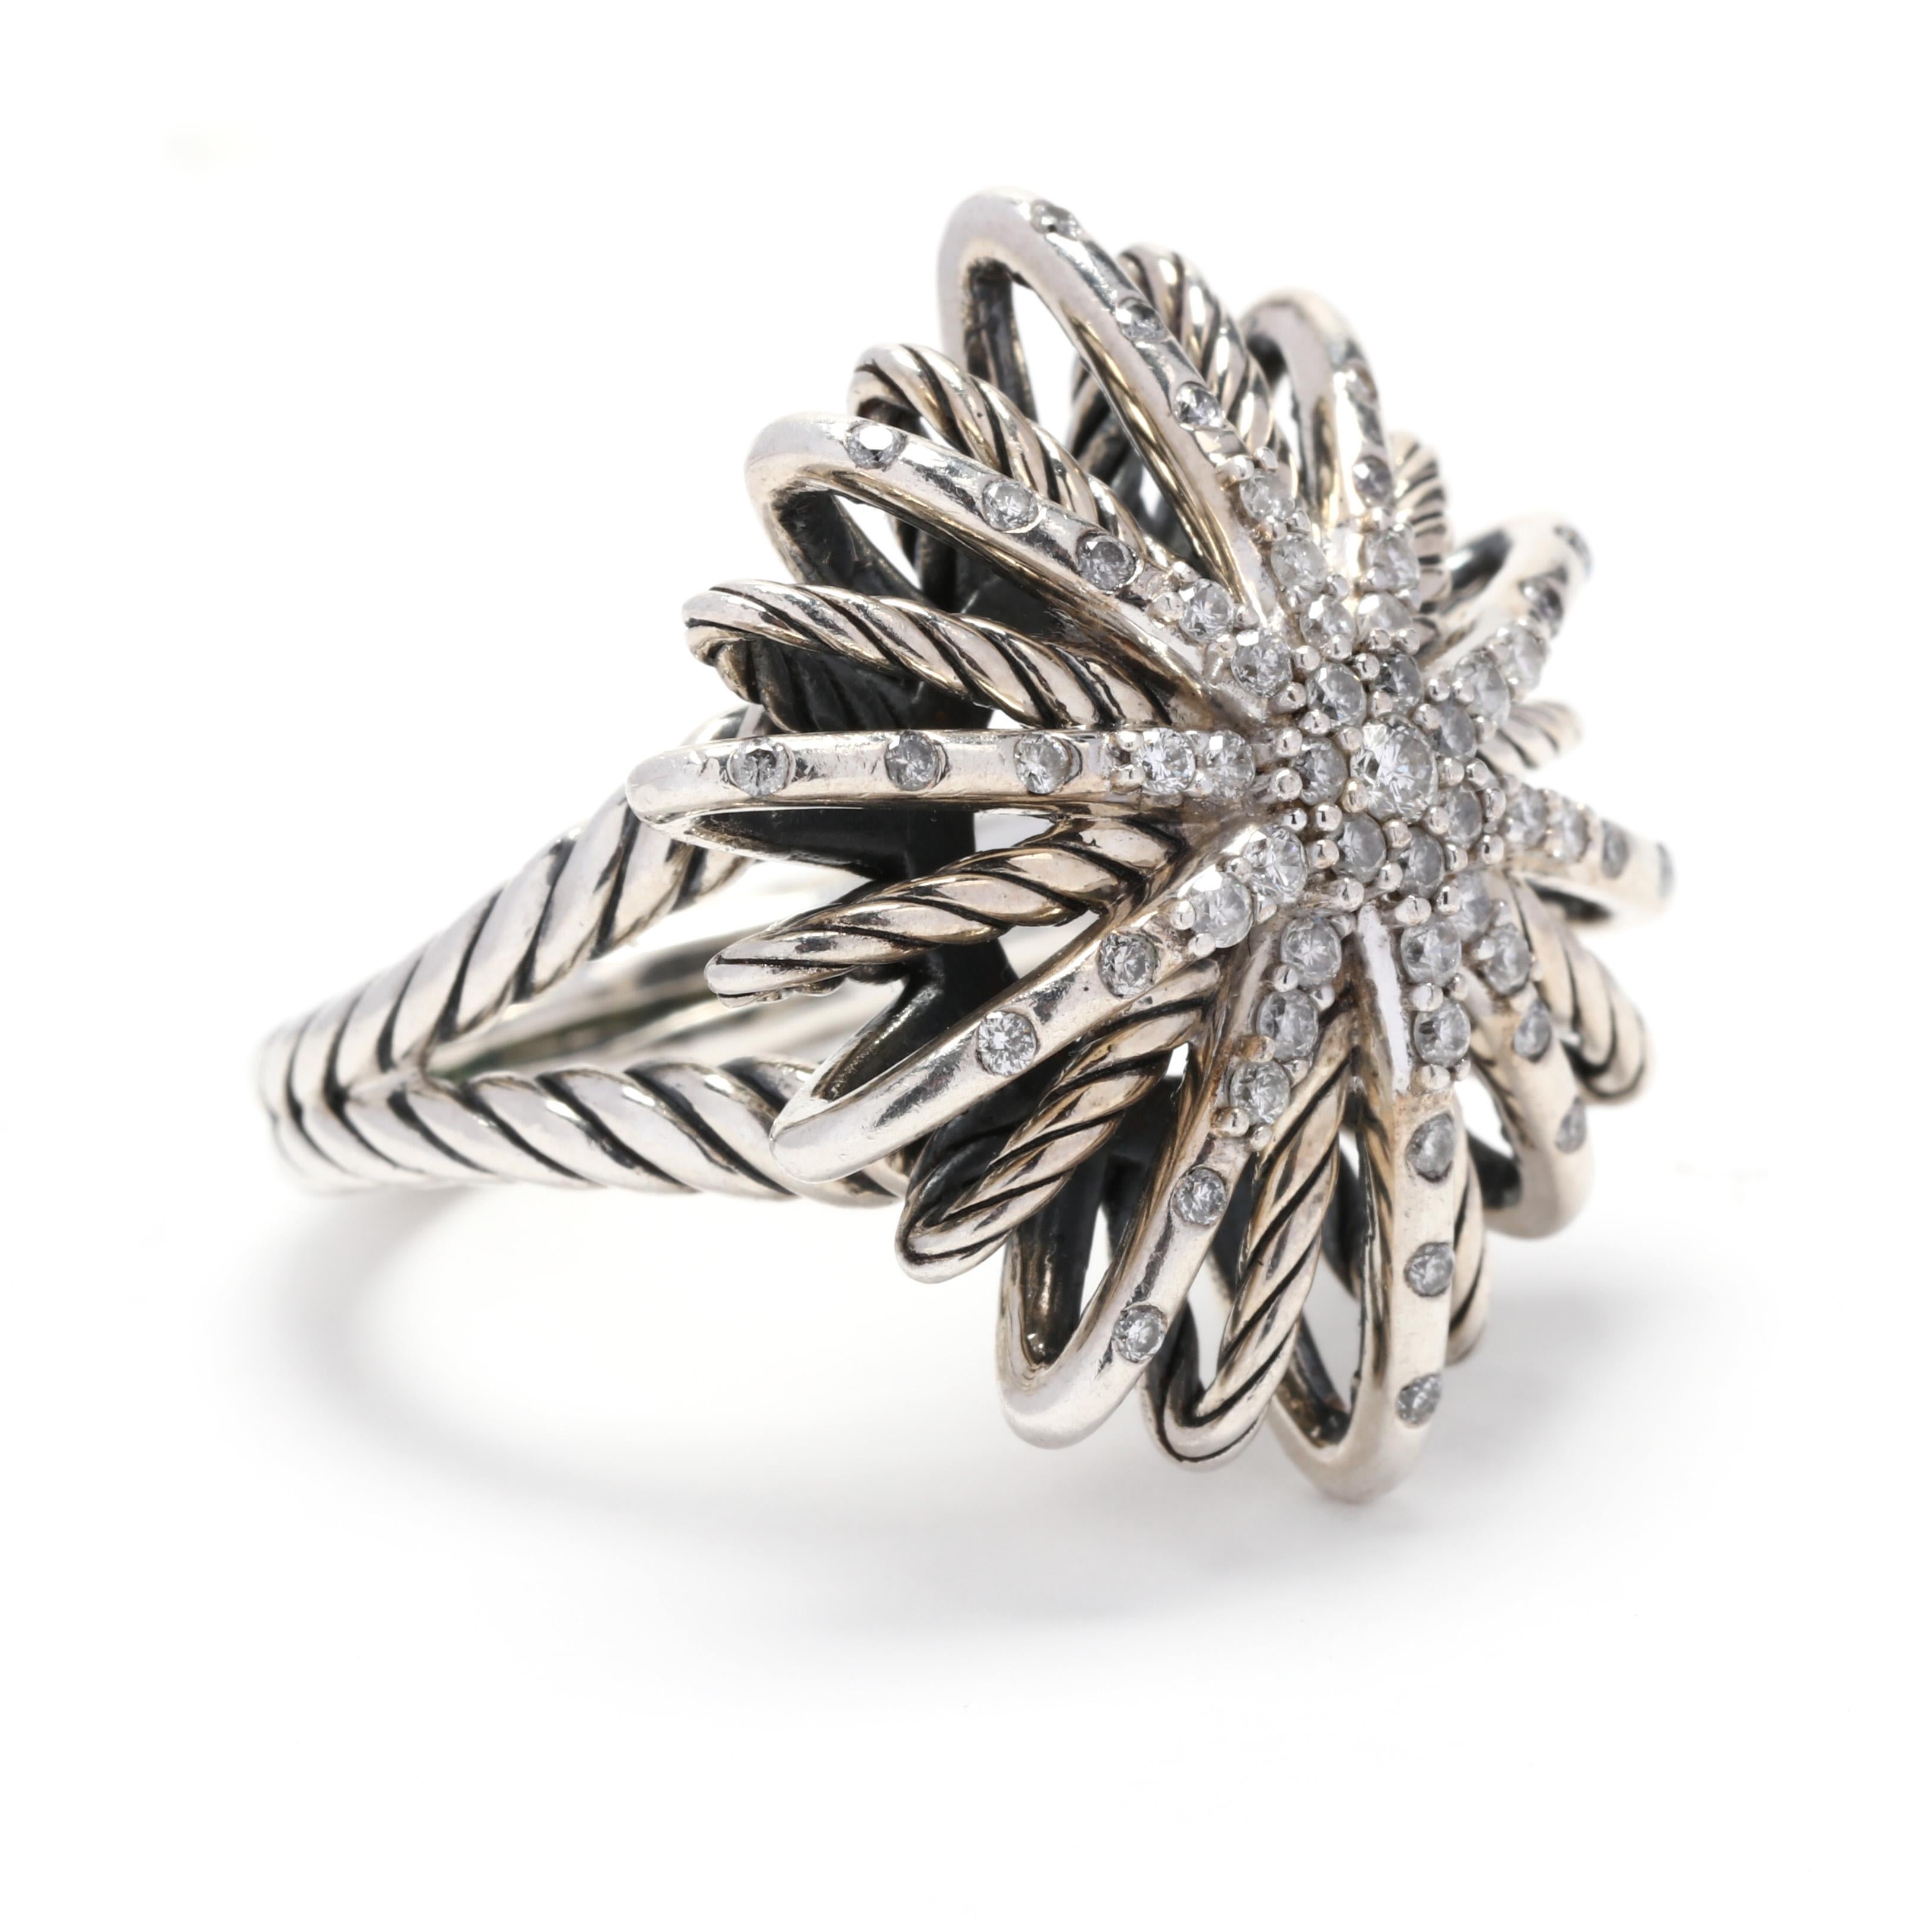 A David Yurman sterling silver and diamond starburst ring. This ring features a starburst design with polished and cable motif detailing, set with full cut round diamonds weighing approximately .50 total carats and a split shank.

Stones:
-